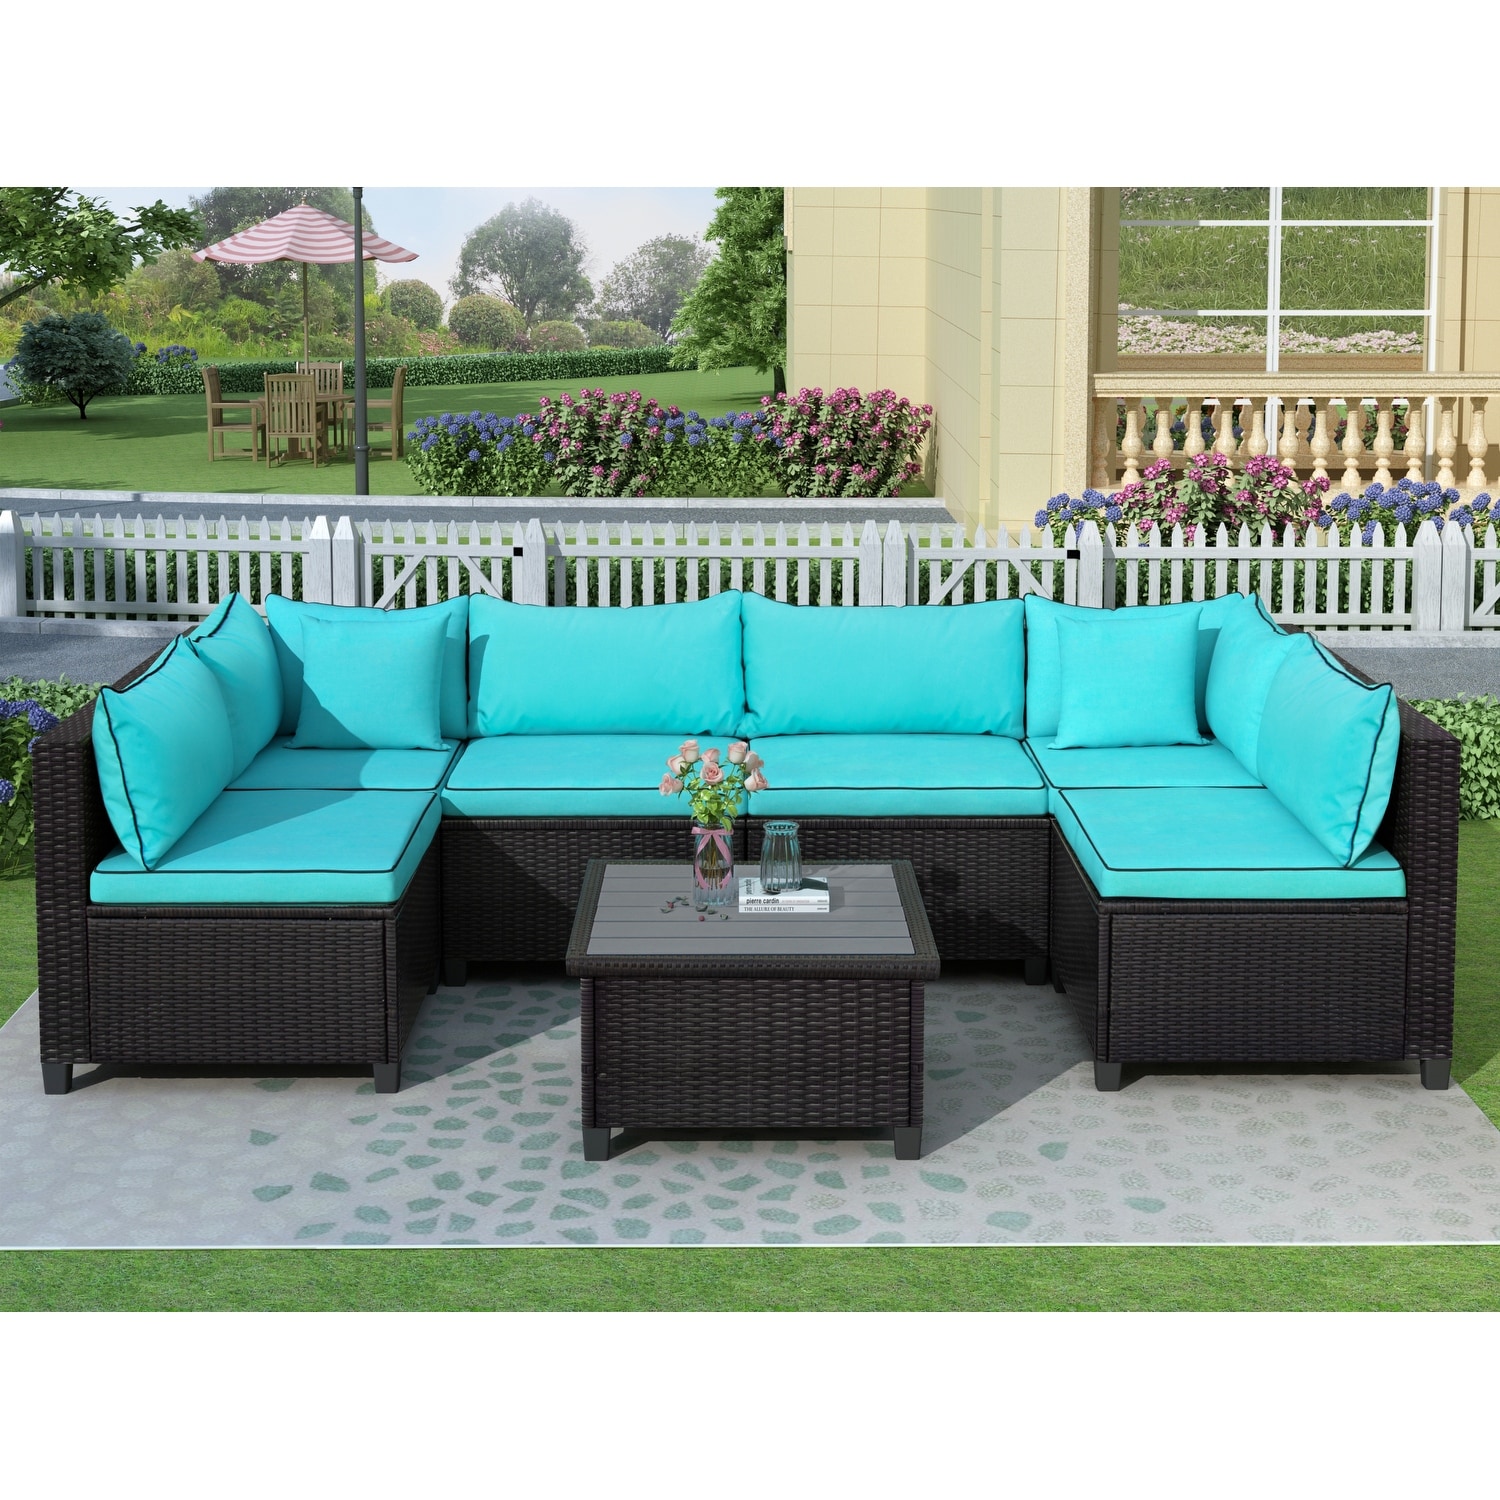 Outdoor Rattan Wicker Sofa Set With Planked Coffee Table